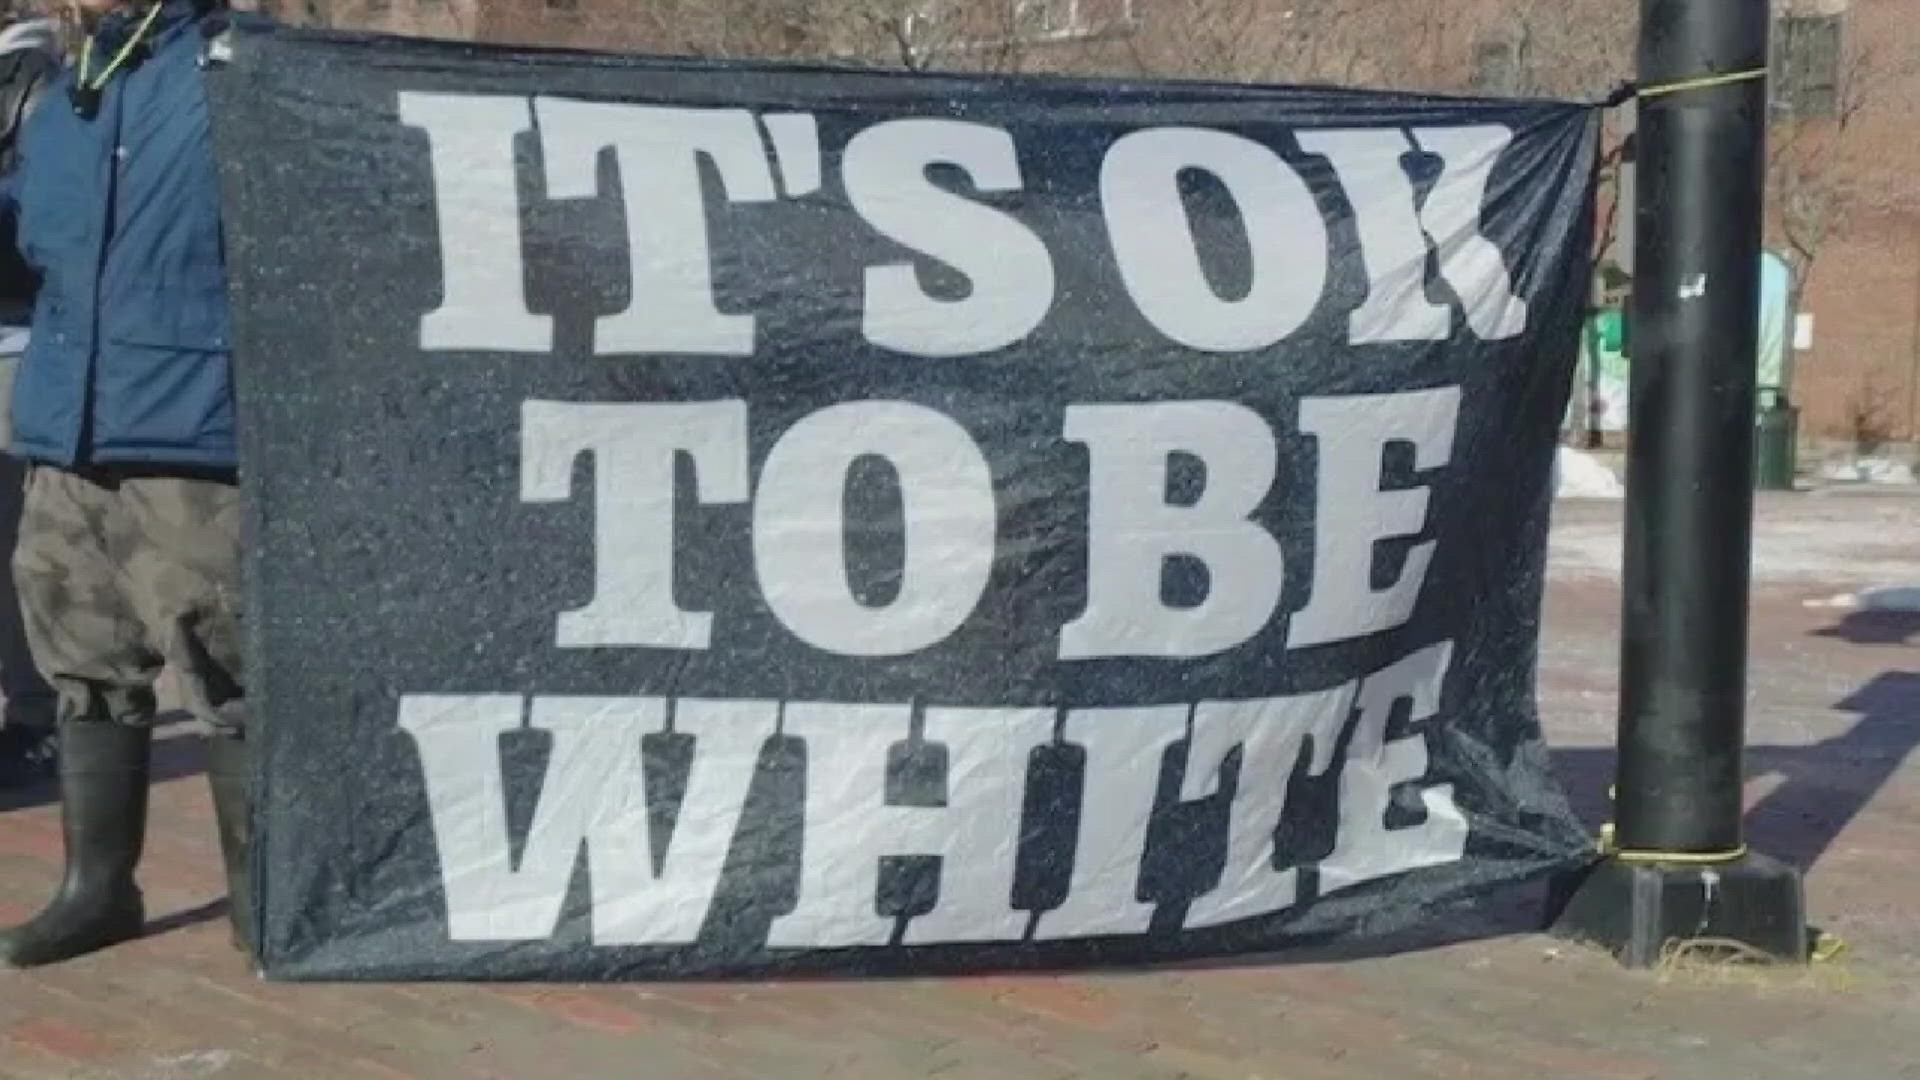 The flag read "It's OK to be white" and was displayed on the first day of Black History Month.